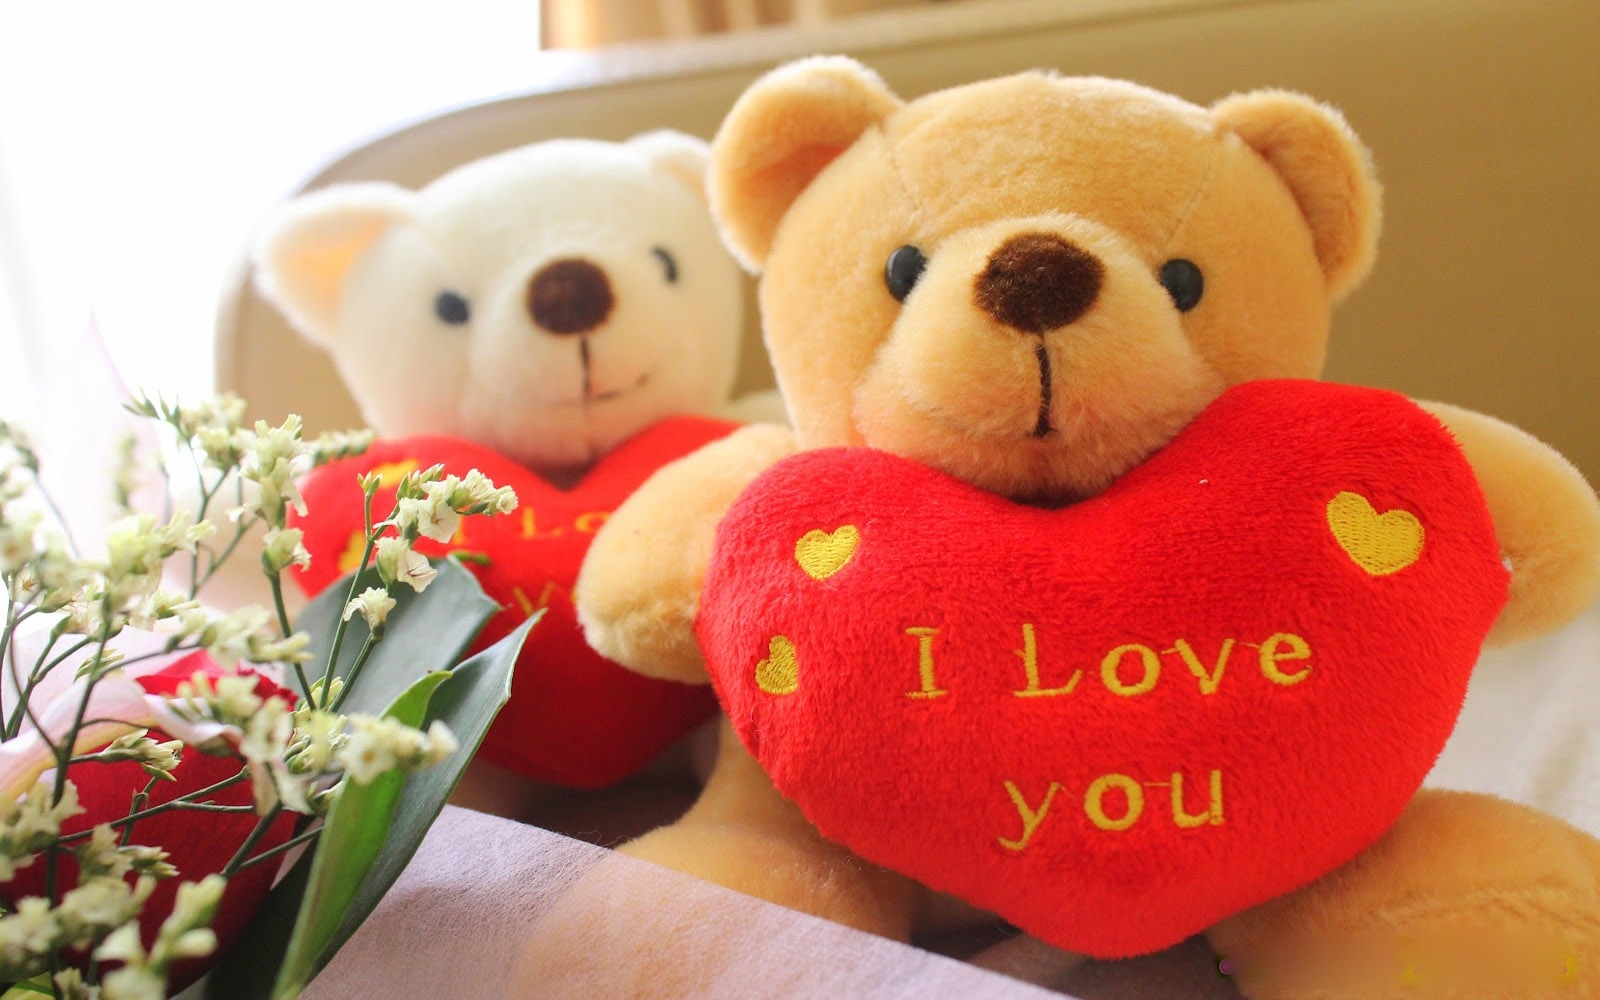 10 New Teddy Bear Love Image FULL HD 1080p For PC Background